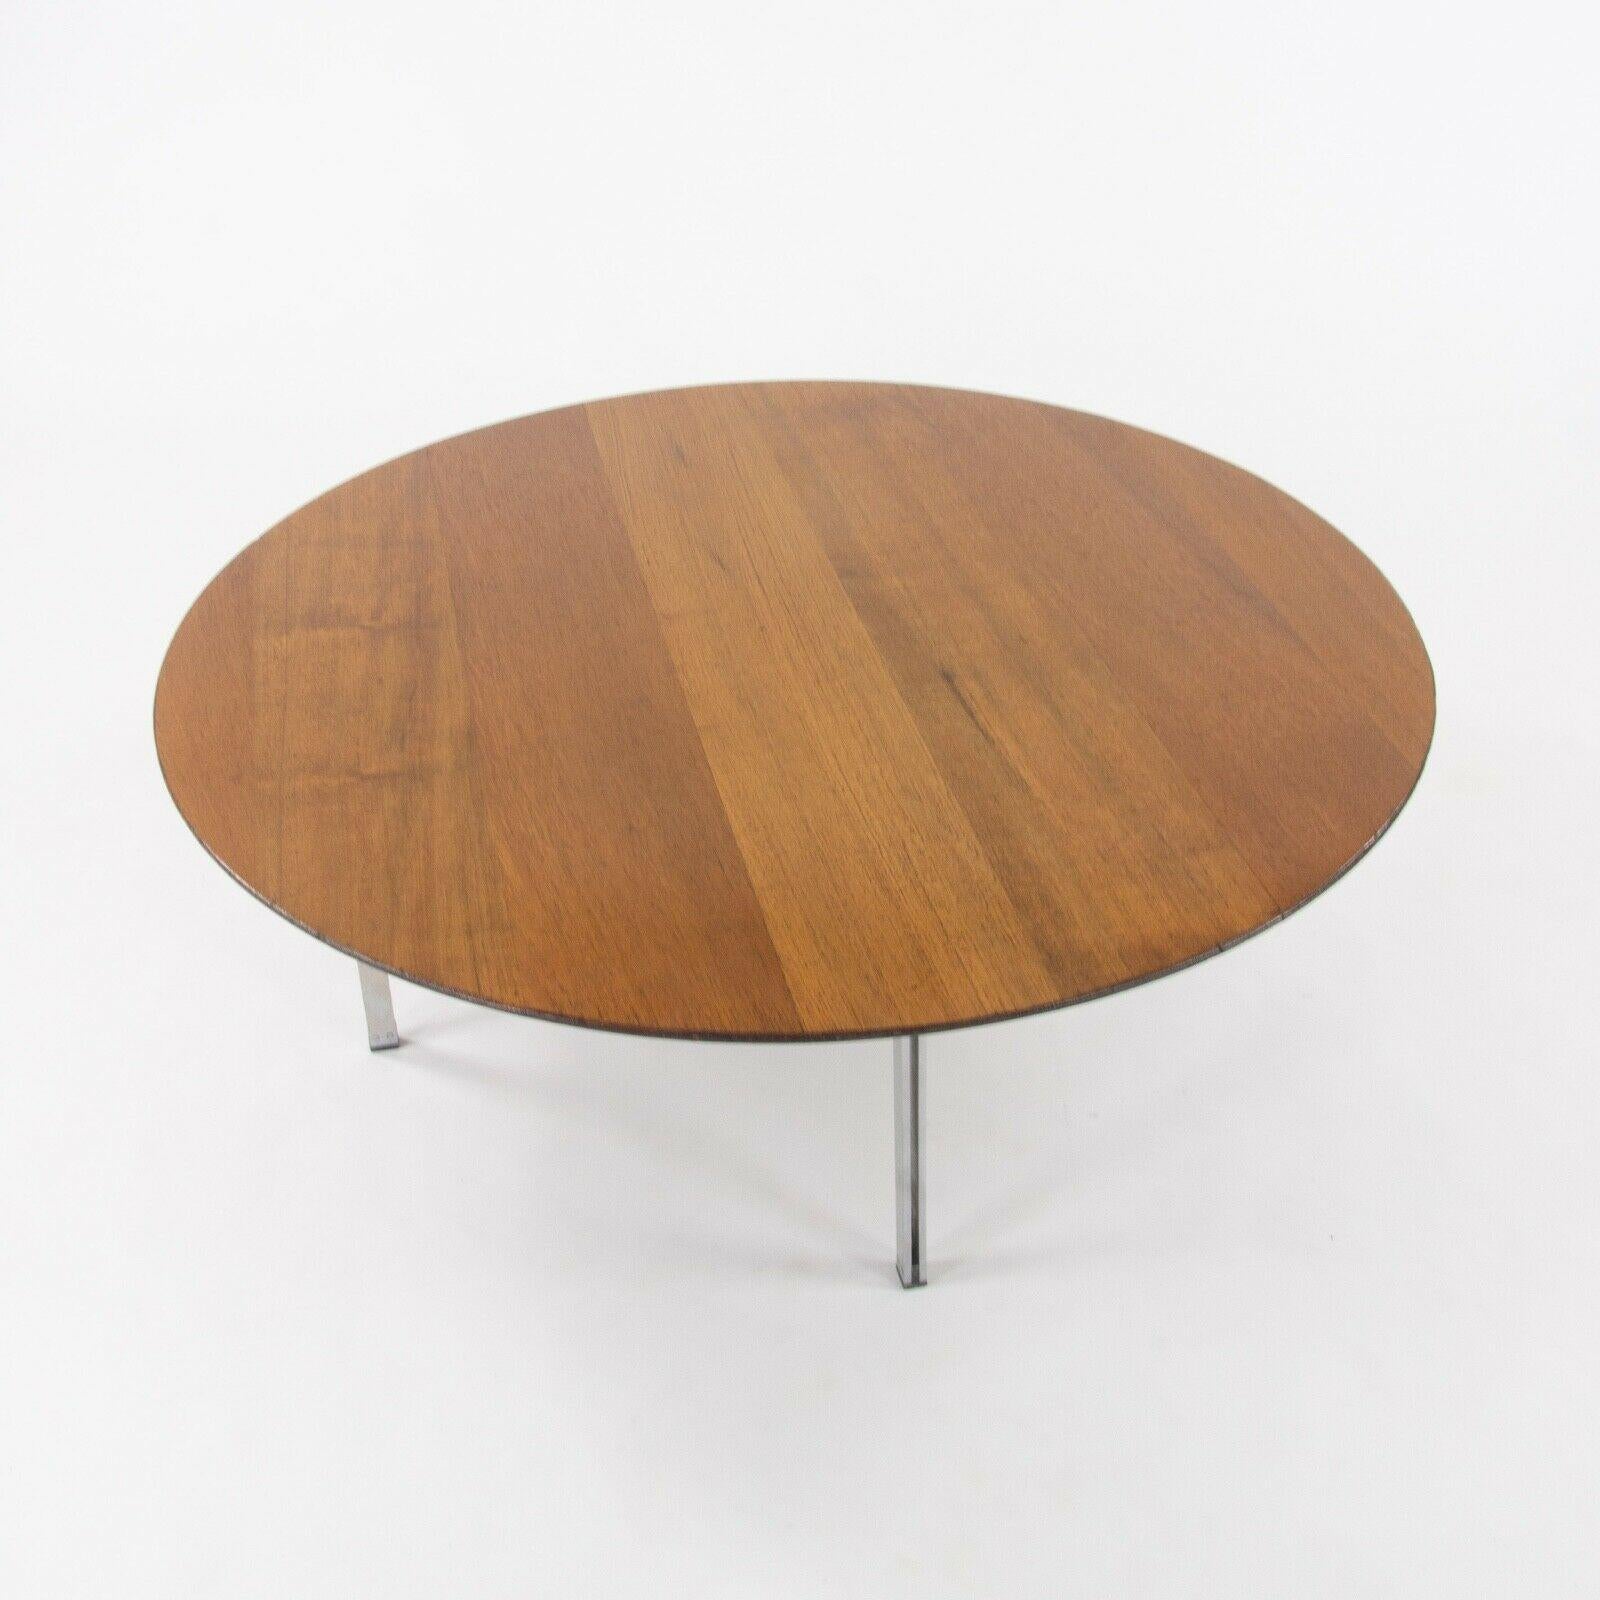 Listed for sale is a very rare Parallel Bar Series coffee table produced by Knoll Associates and designed by Florence Knoll. This table was specified with a solid walnut top (a very unusual detail) and parallel bar metal legs. This is a terrific